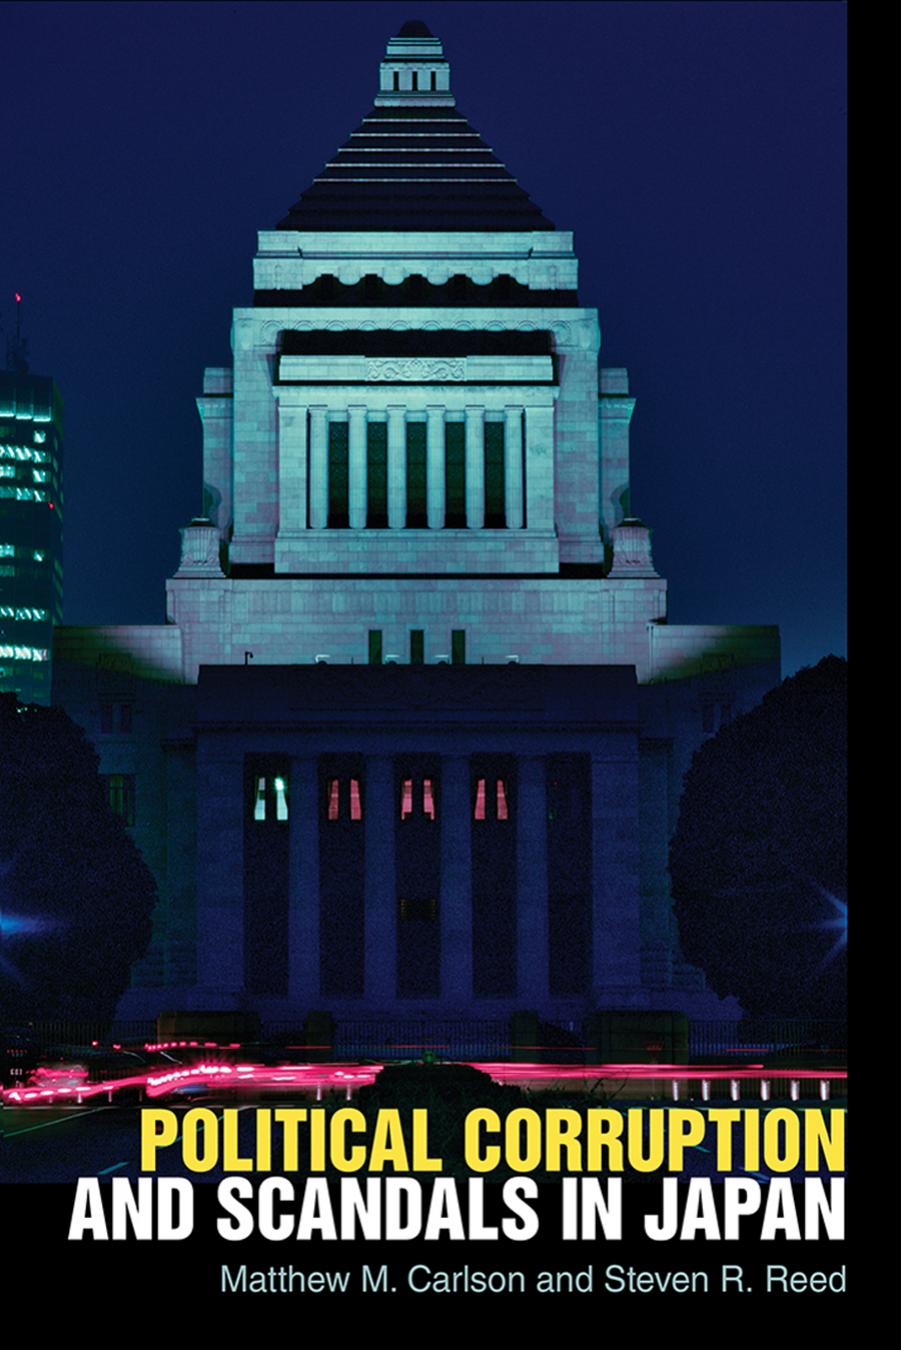 Political Corruption and Scandals in Japan by Matthew M. Carlson & Steven R. Reed